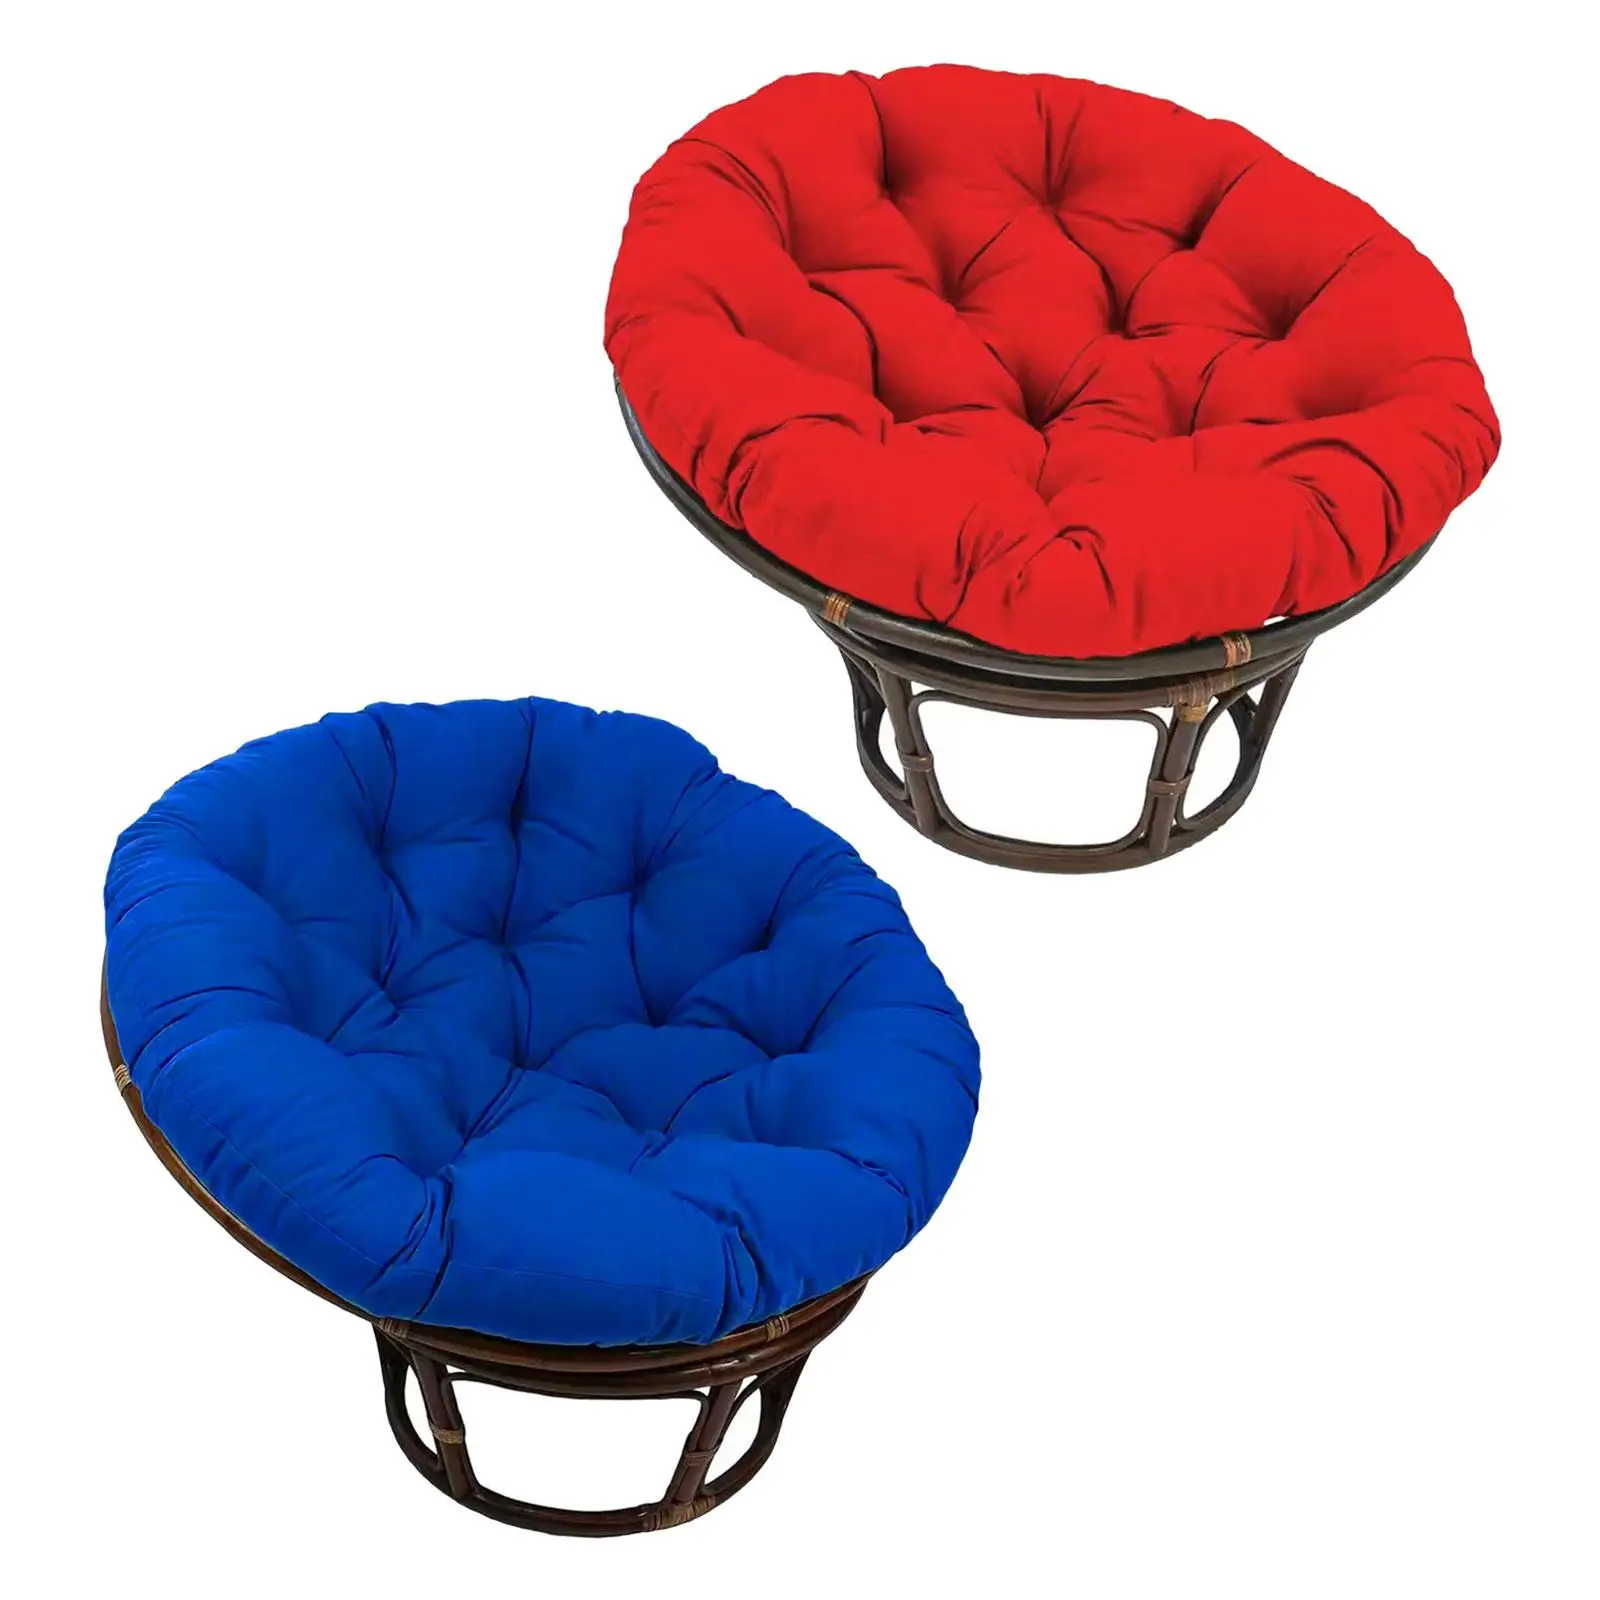 Washable Porch Swings Chair Cushion Hanging Egg Chair Cushion for Hanging Baskets Hanging Beds Rocking Chairs Garden Offices